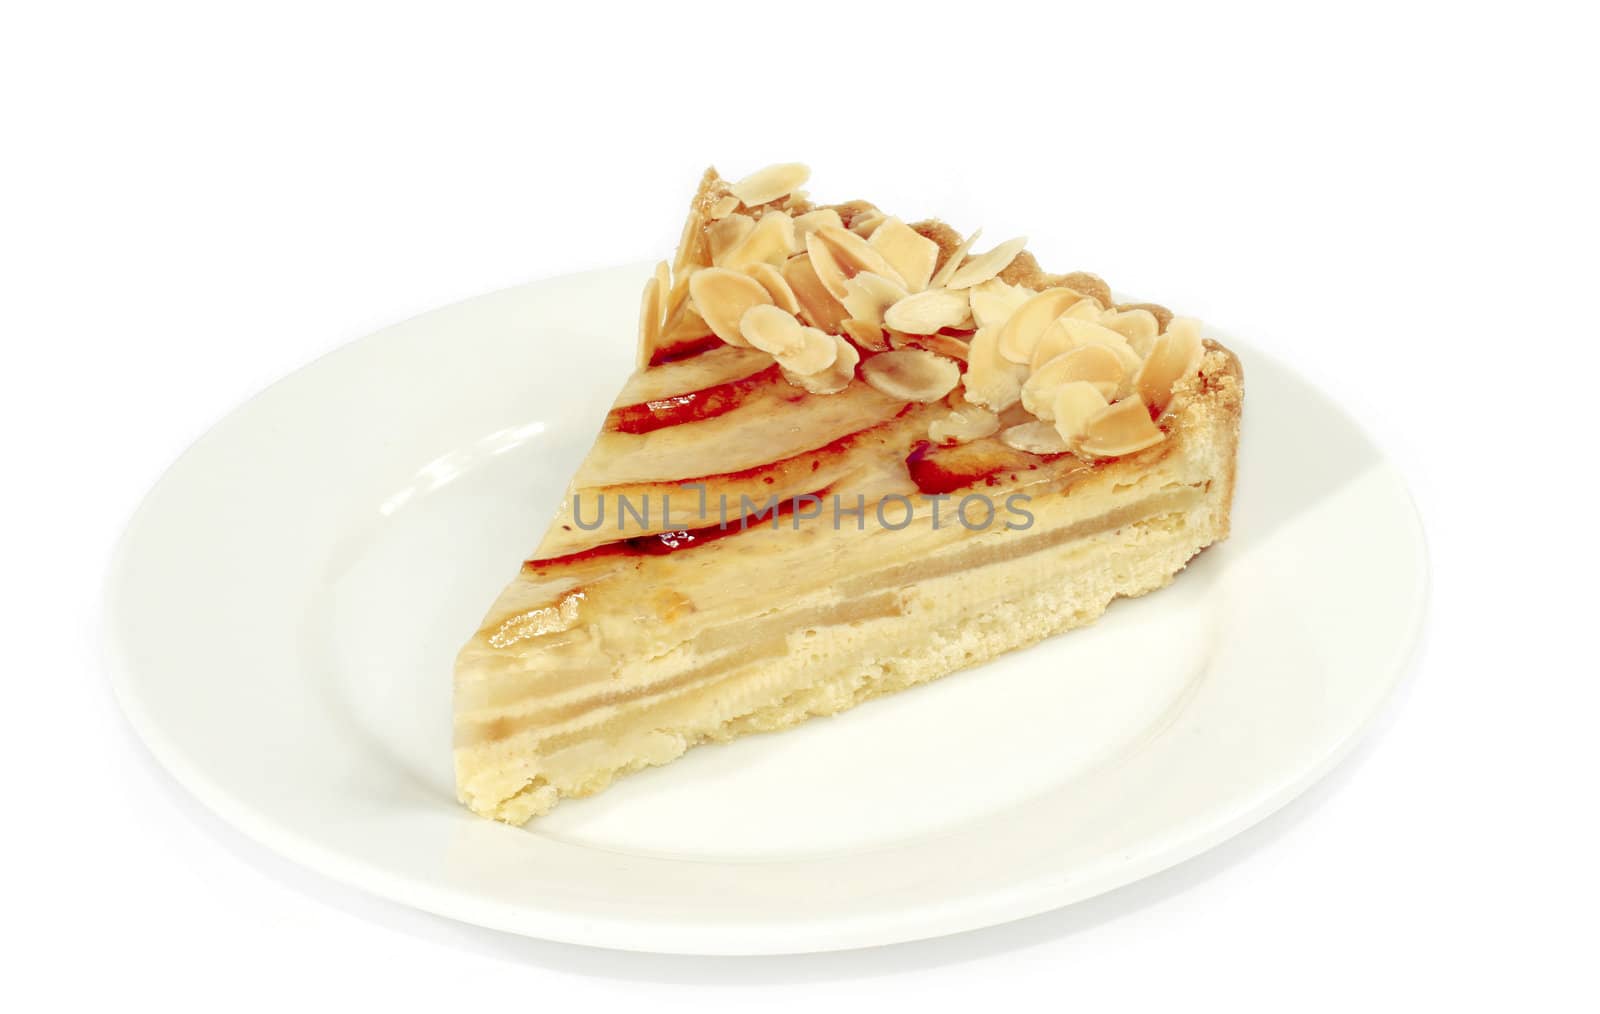 tasty pie with apple and with grated almond